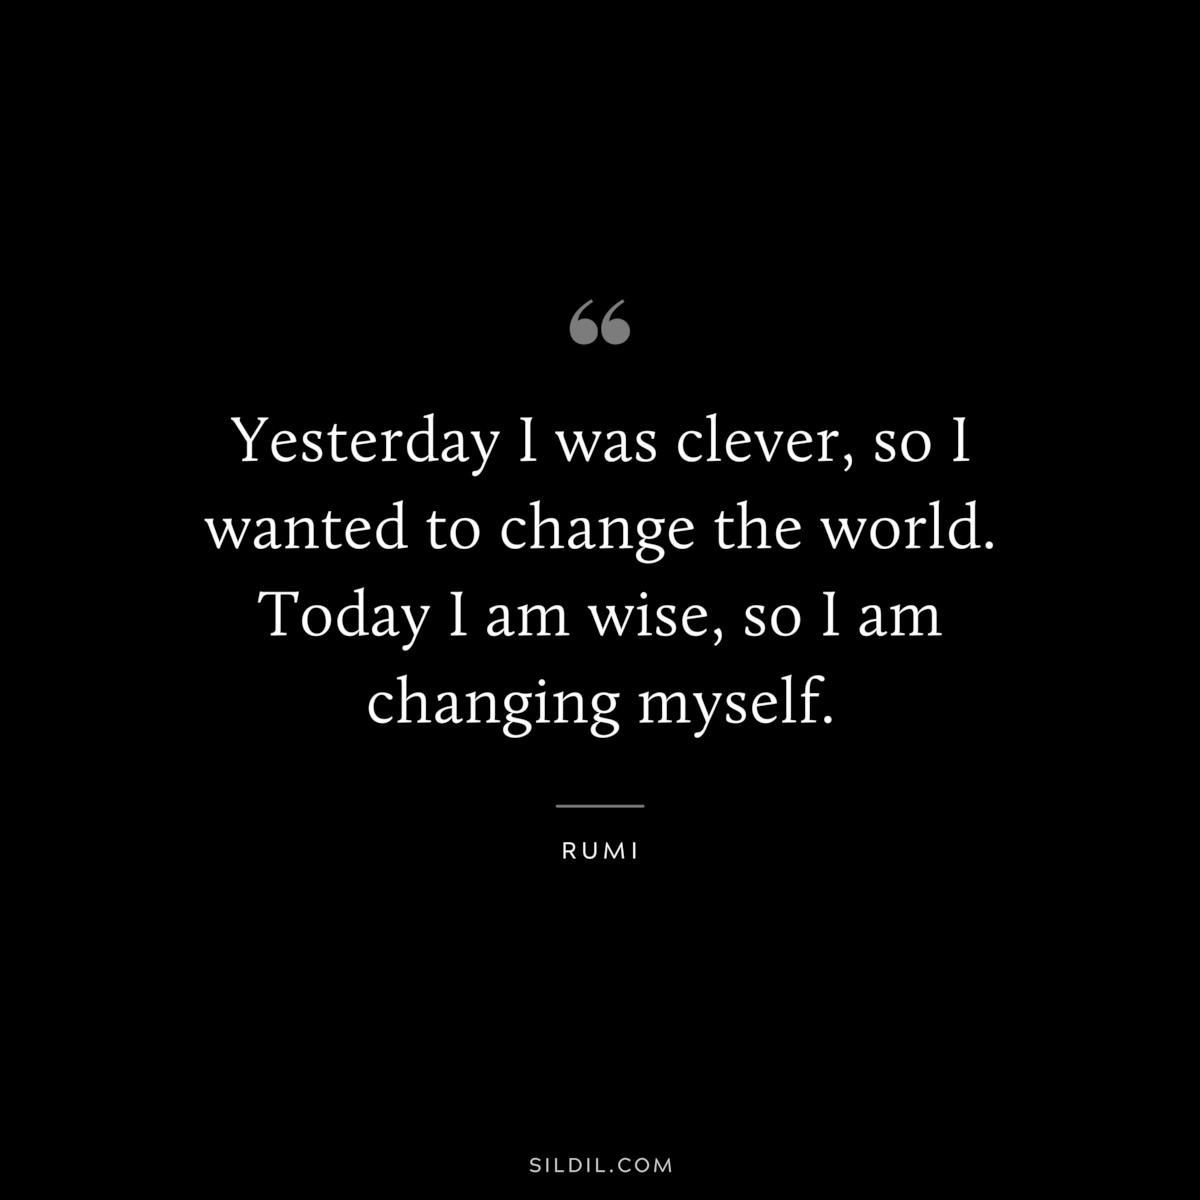 Yesterday I was clever, so I wanted to change the world. Today I am wise, so I am changing myself. ― Rumi